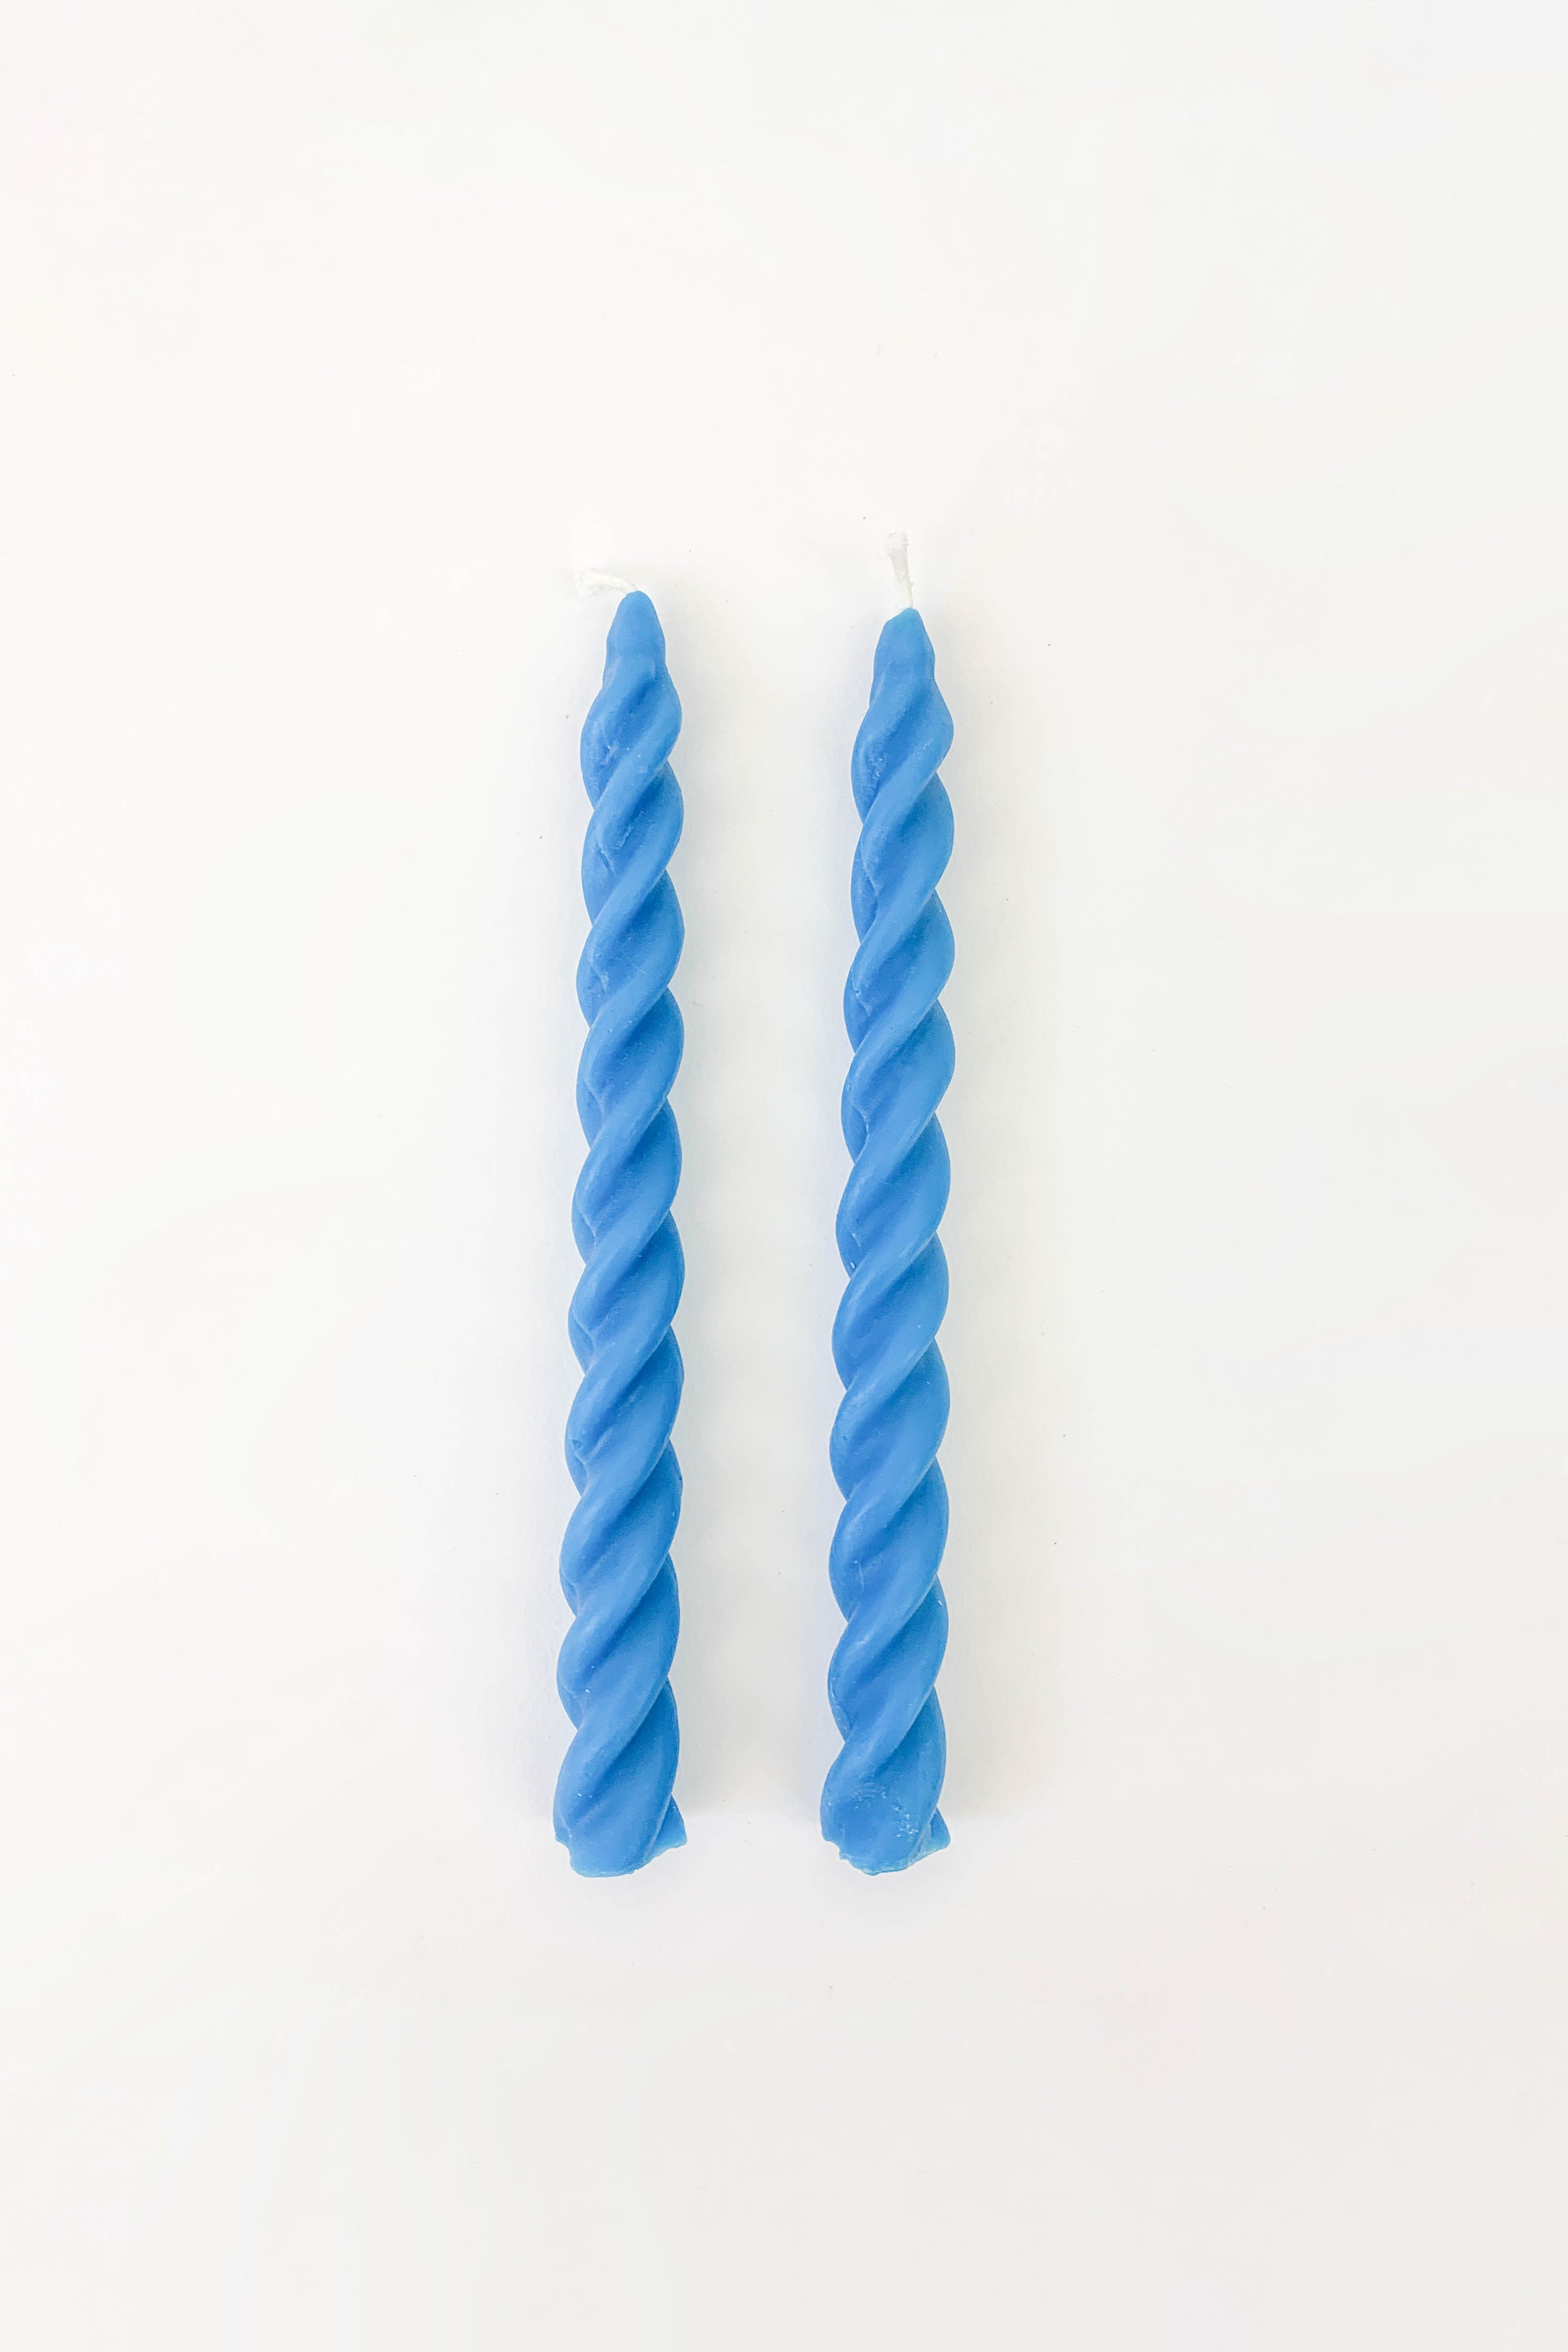 Twisted Taper Candle in Mediterranean Blue